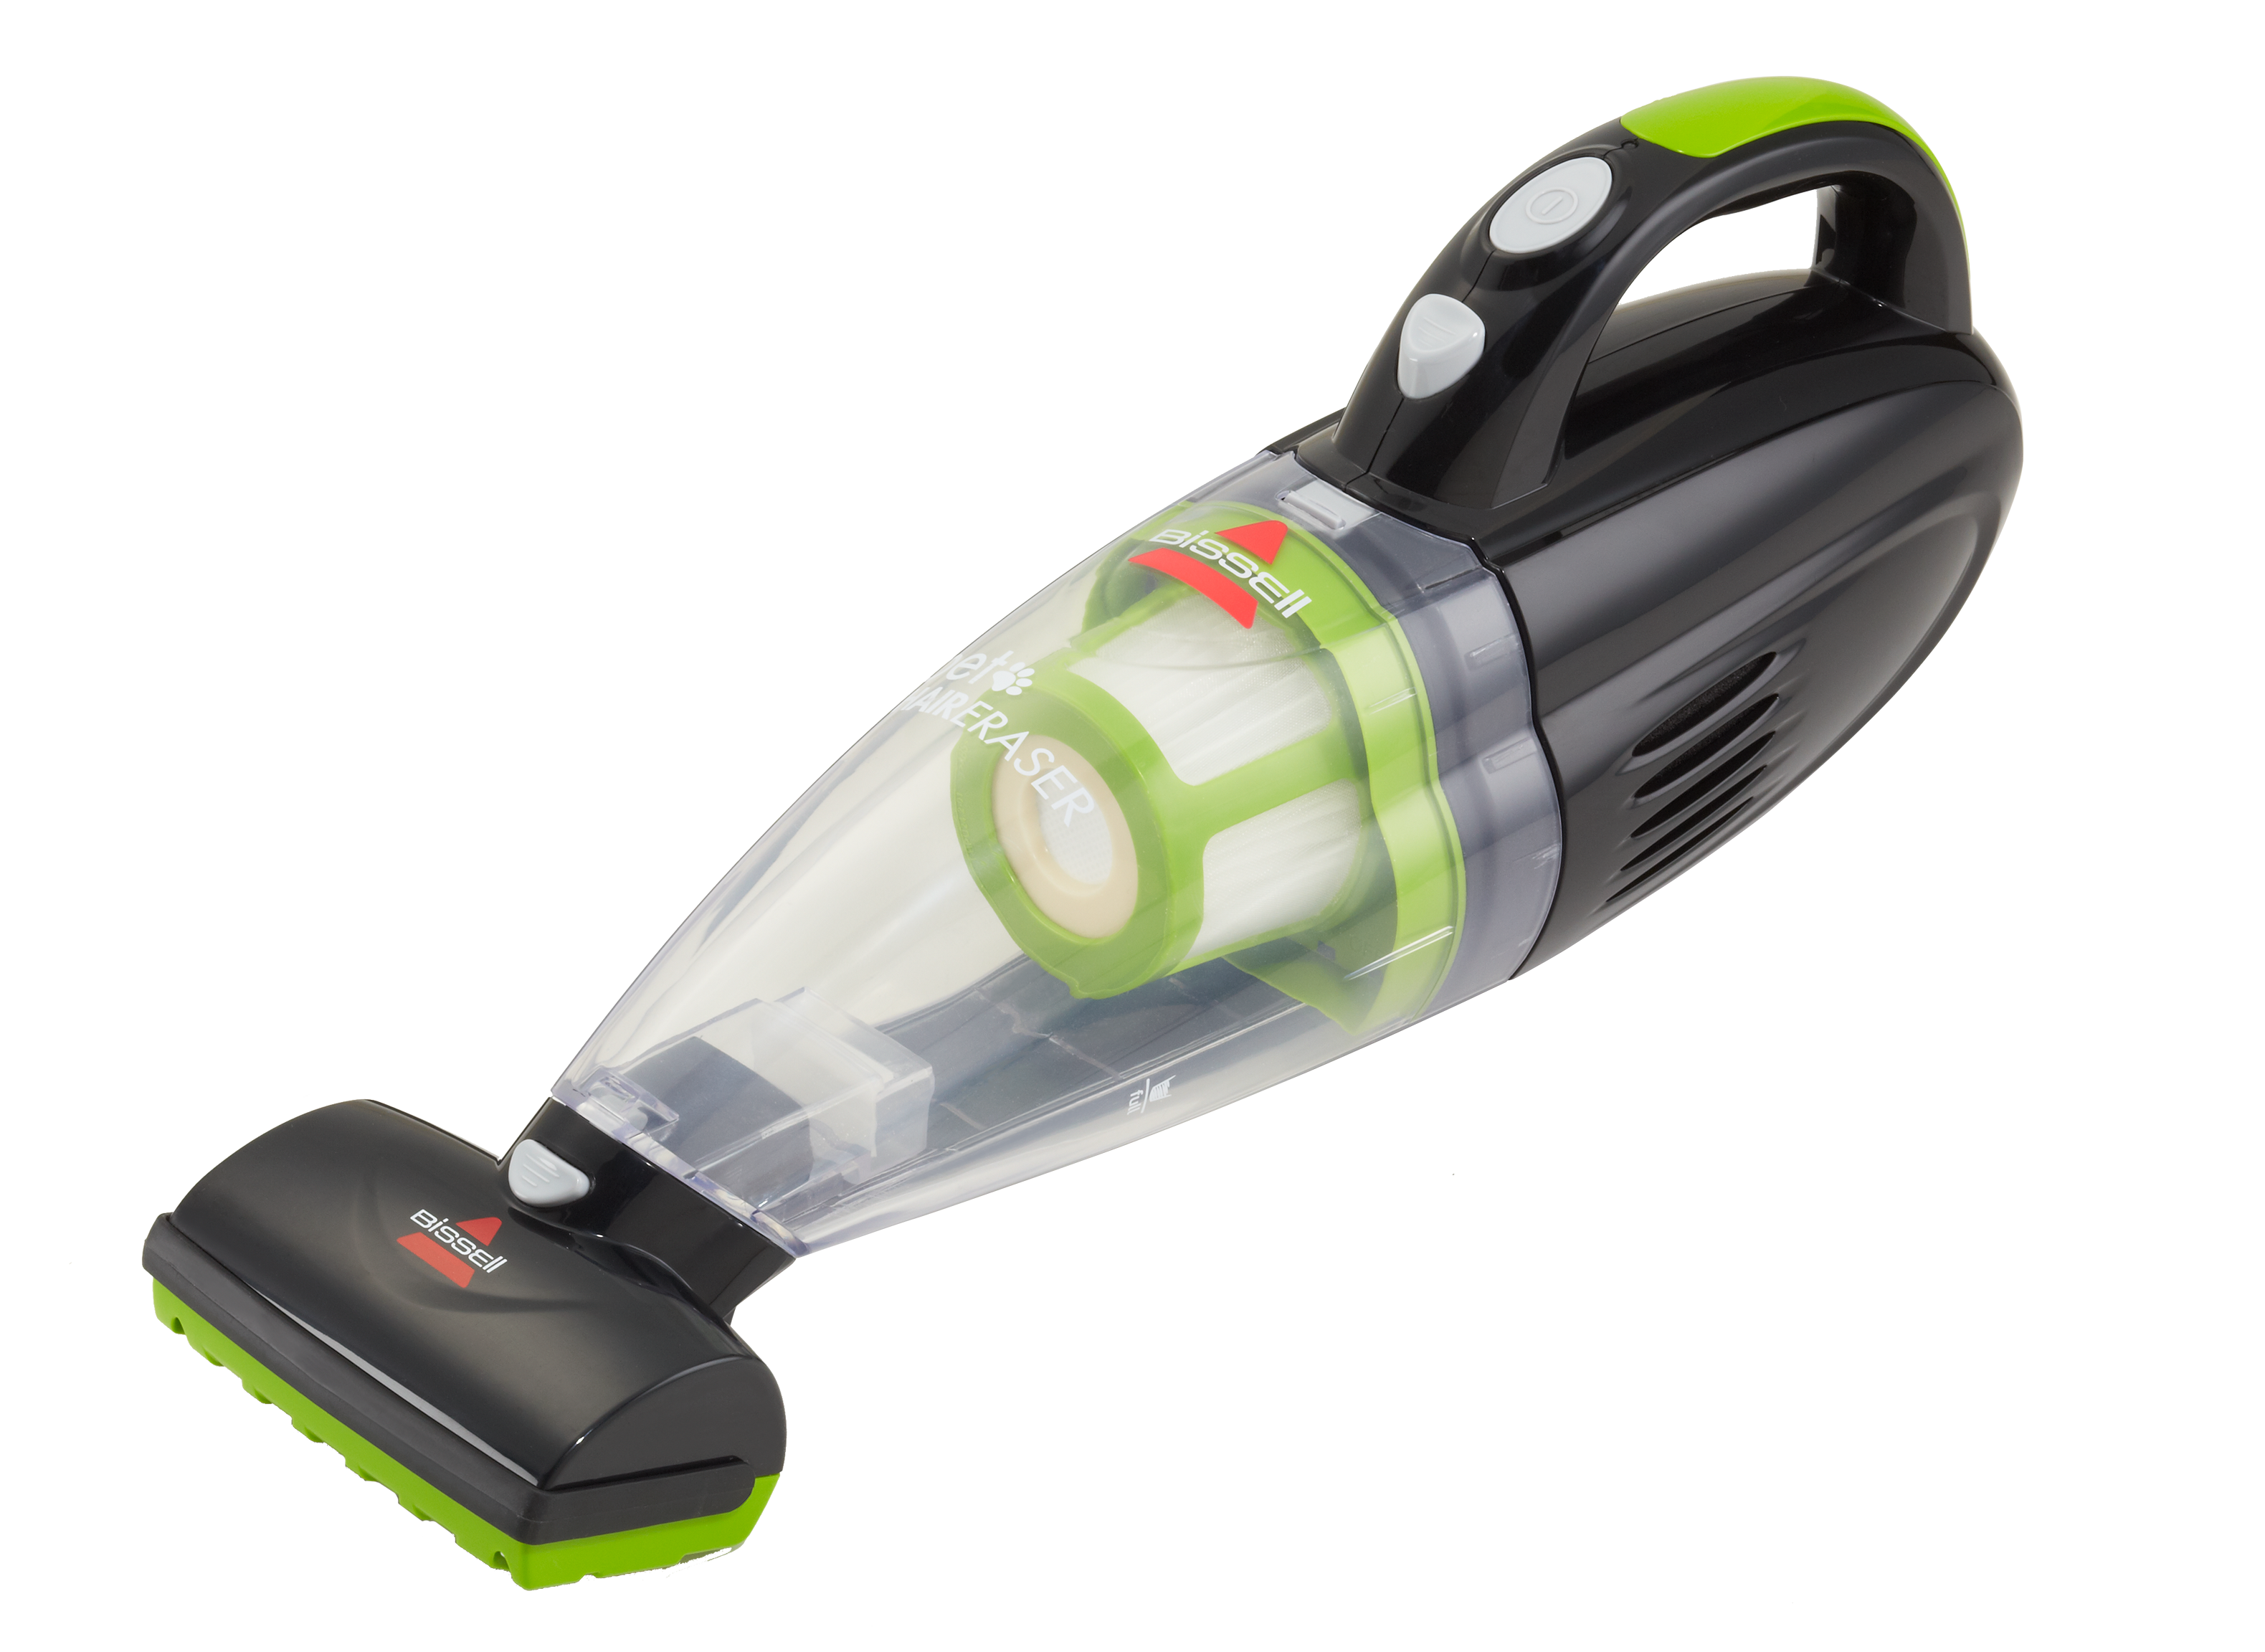 https://crdms.images.consumerreports.org/prod/products/cr/models/394618-handheld-vacuums-bissell-pet-hair-eraser-1782-59964.png